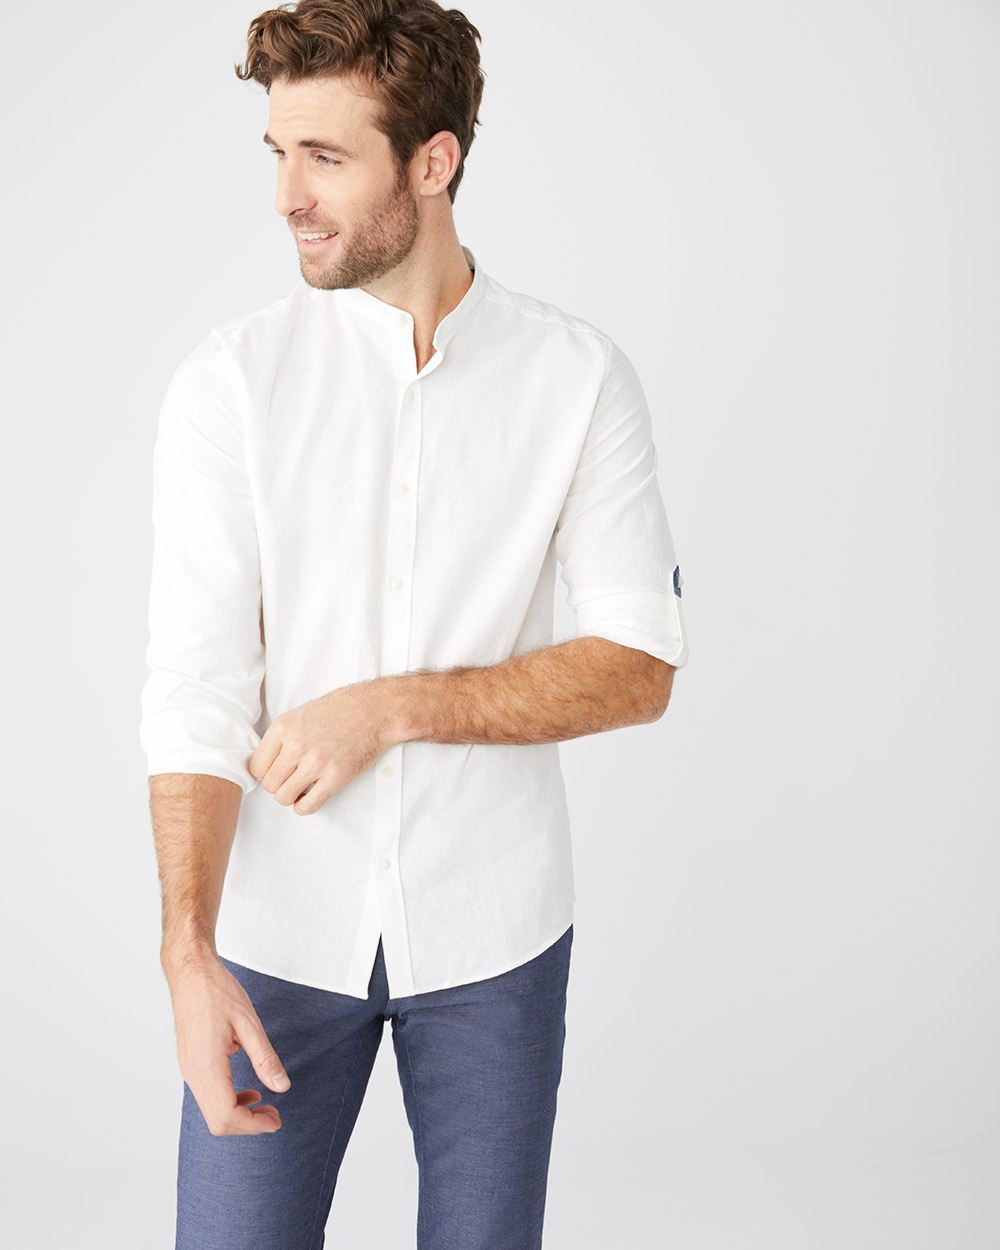 Tailored Fit white linen-blend Shirt with Mandarin collar | RW&CO.